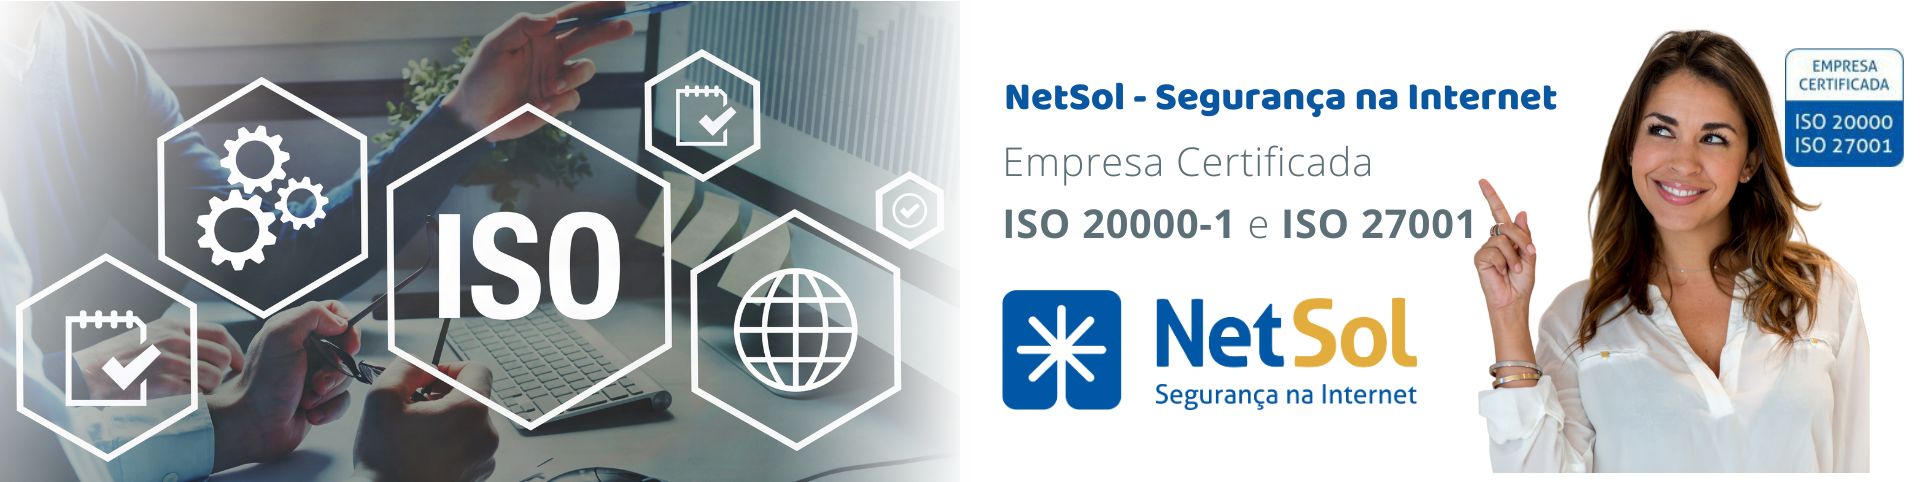 NetSol_Certificacoes_ISO